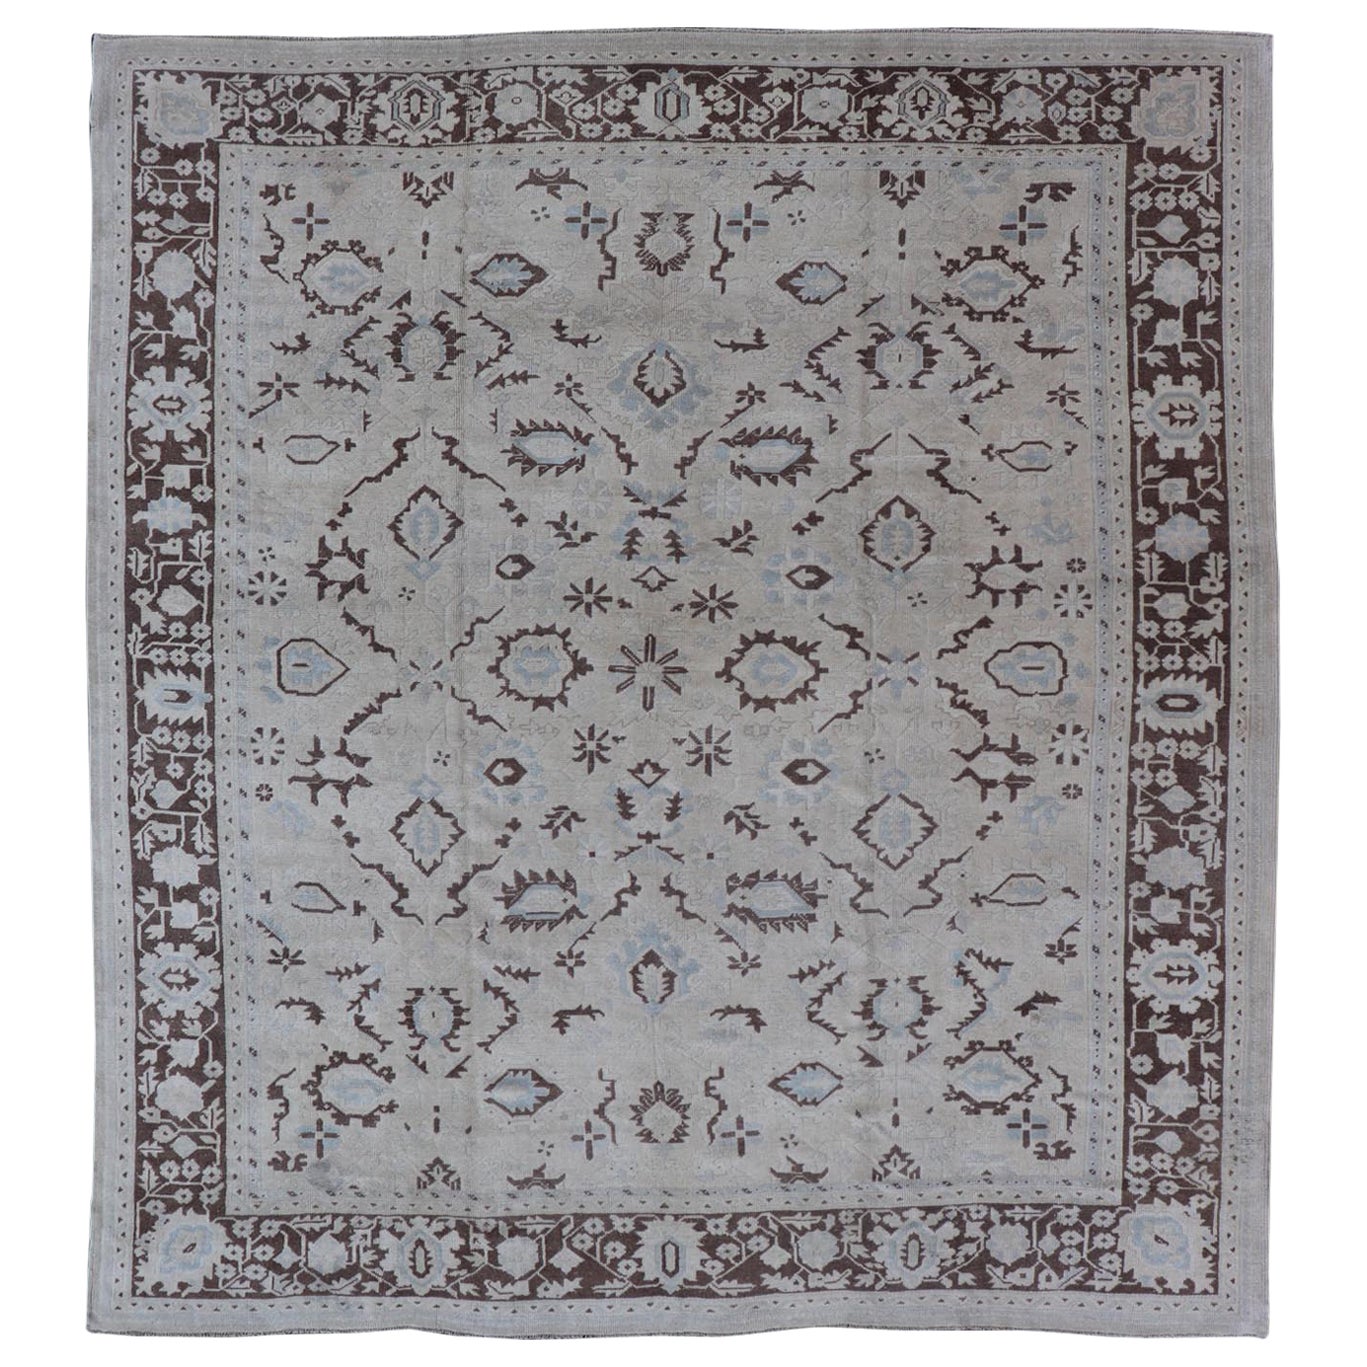 Square Shaped Vintage Turkish Oushak Rug with Brown, Lt. Blue and Cream Tones